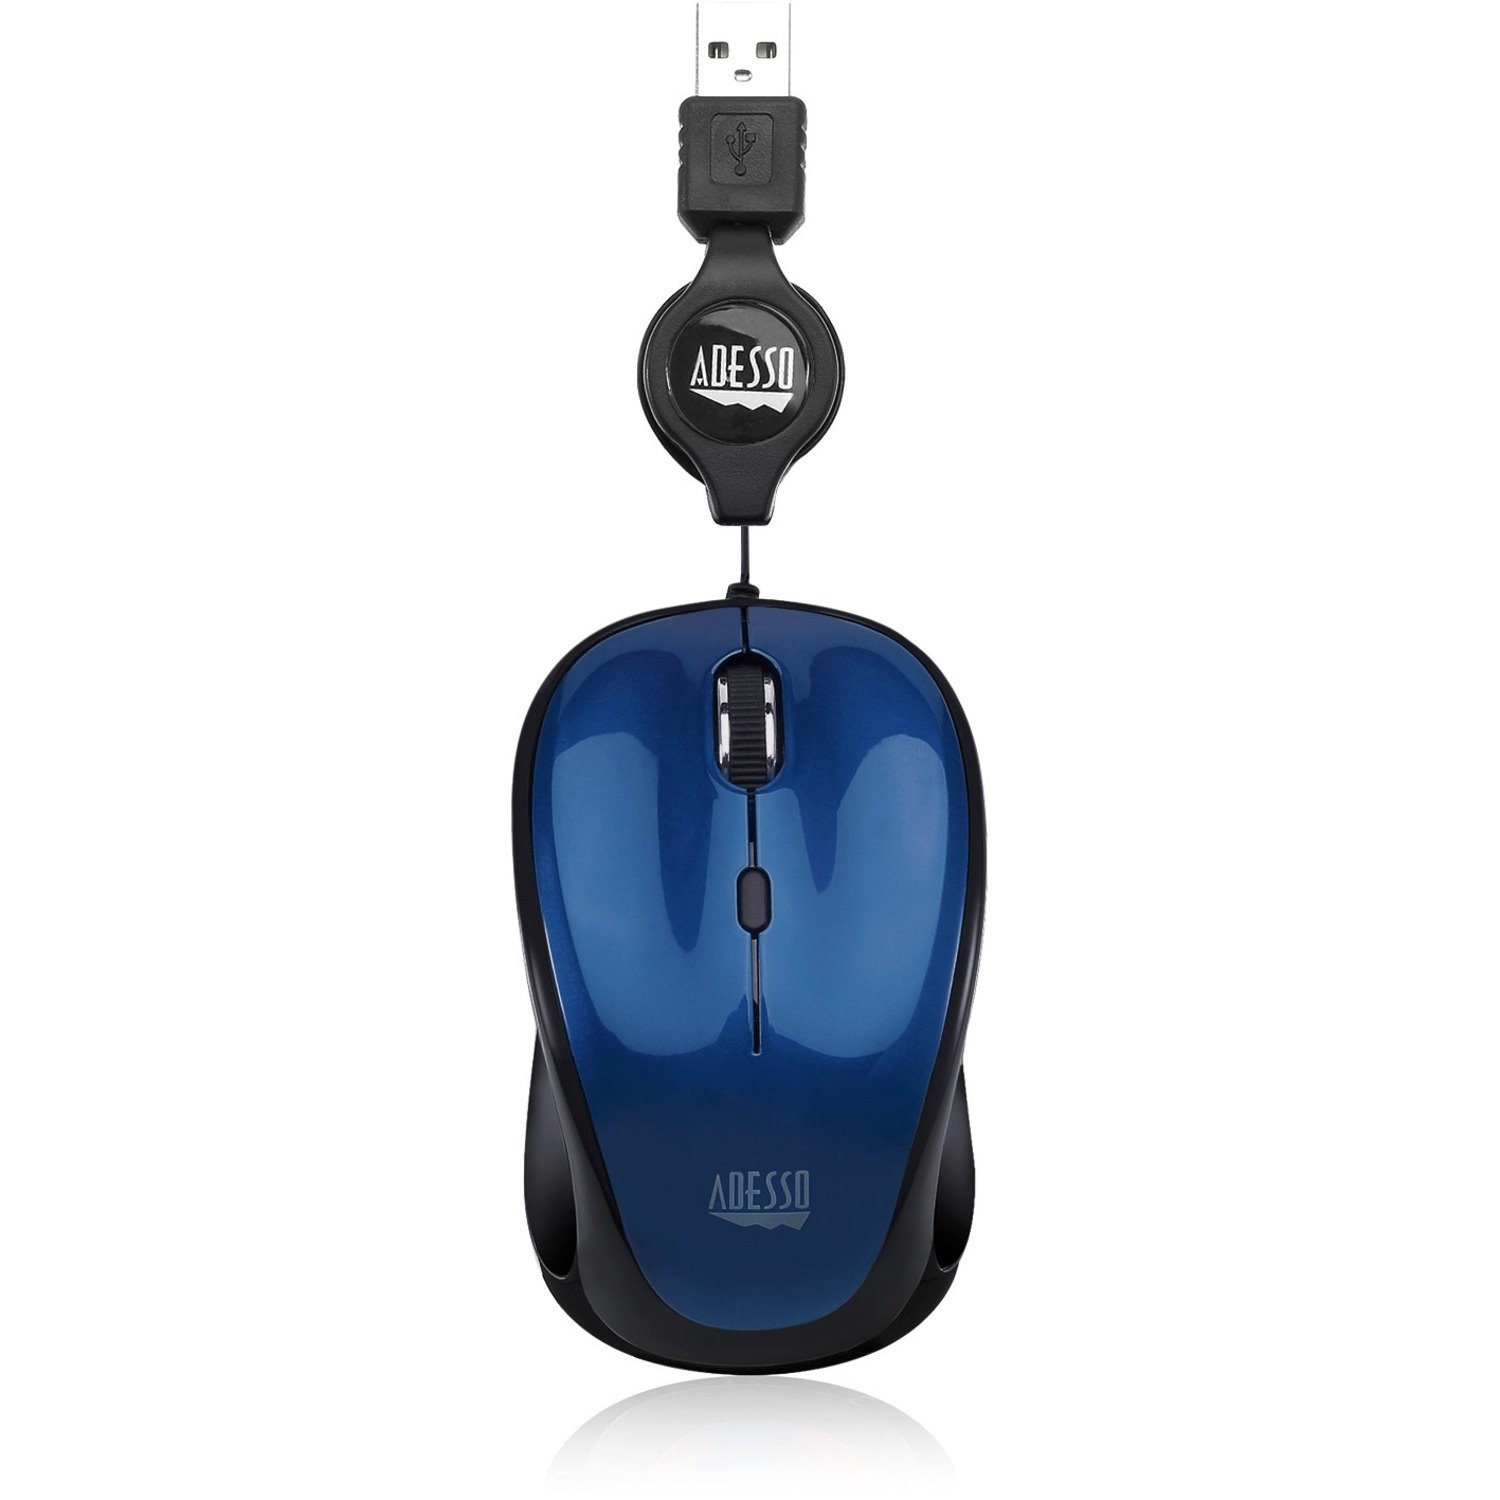 Adesso iMouse S8L Mouse - USB 2.0 - Optical - 3 Button(s) - Blue